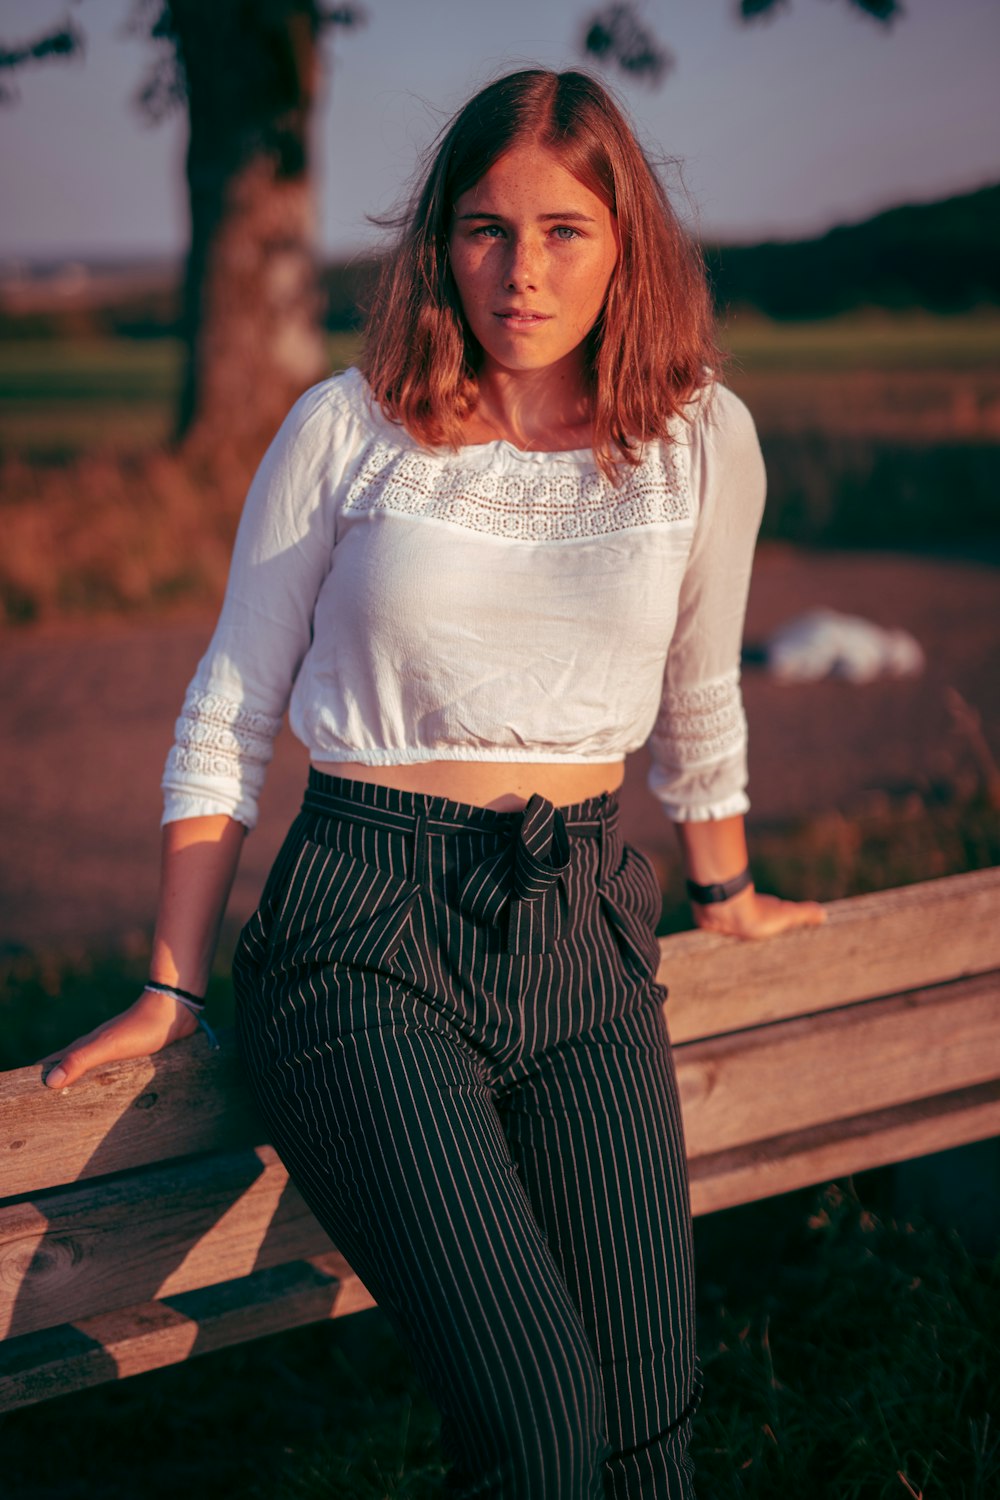 woman in white long sleeve shirt and black and white striped pants sitting on brown wooden